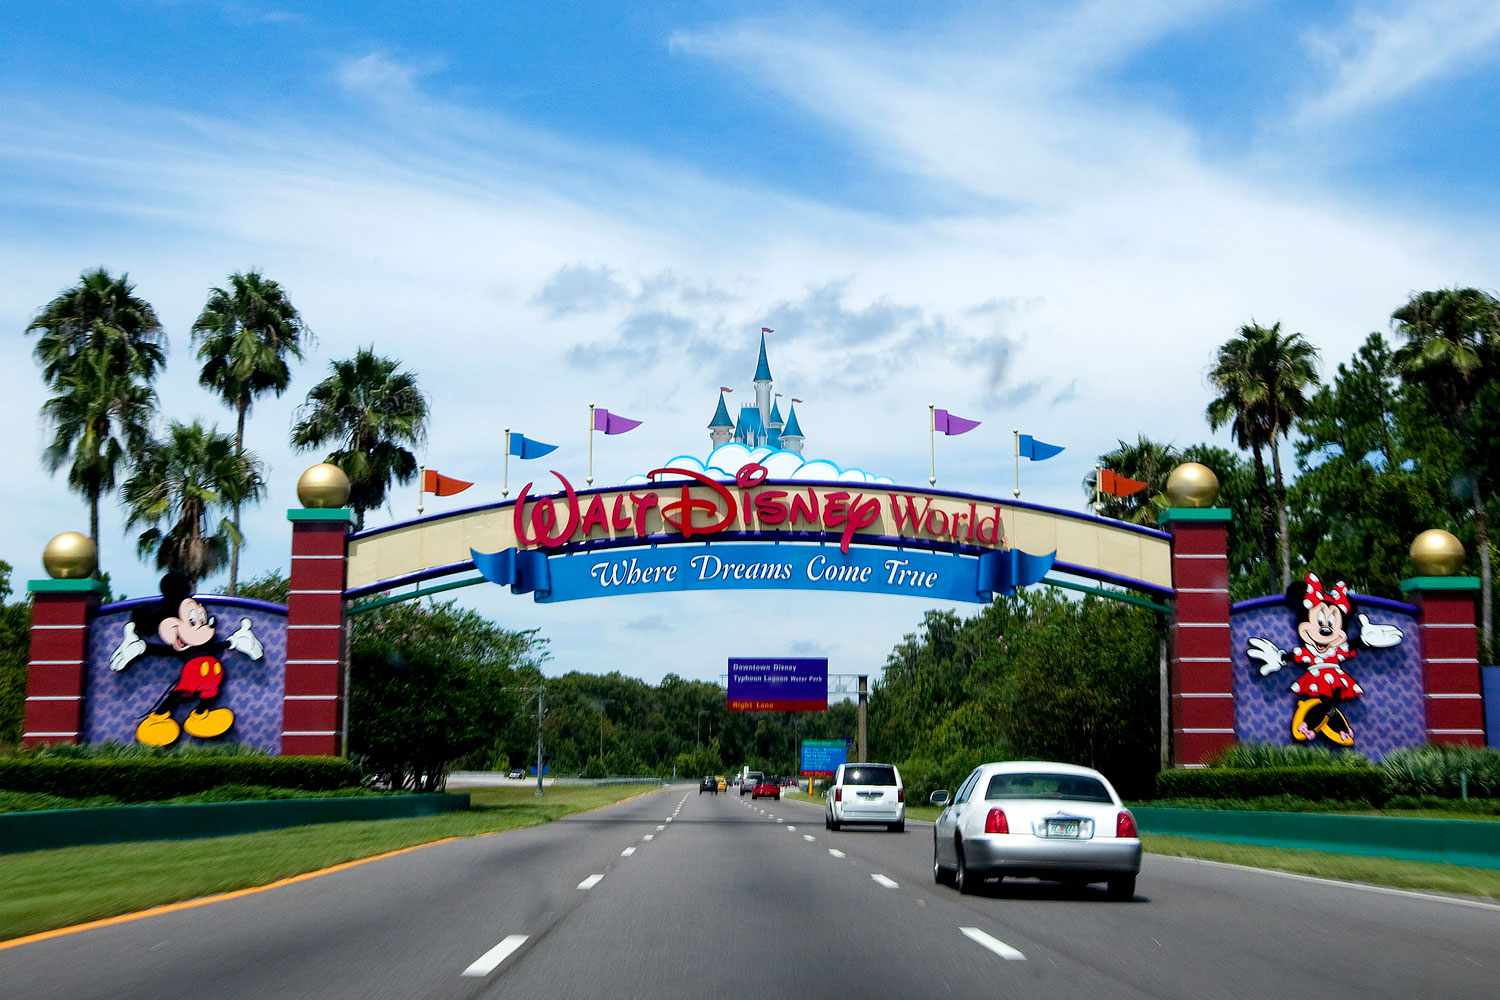 Vehicles pass the entrance to the Walt Disney World theme park and resort in Lake Buena Vista, Florida, U.S., on Monday, Aug. 31, 2009. Walt Disney Co. said it agreed to buy Marvel Entertainment Inc. for about $4 billion in a stock and cash transaction, gaining comic book characters including Iron Man, Spider-Man and Captain America.